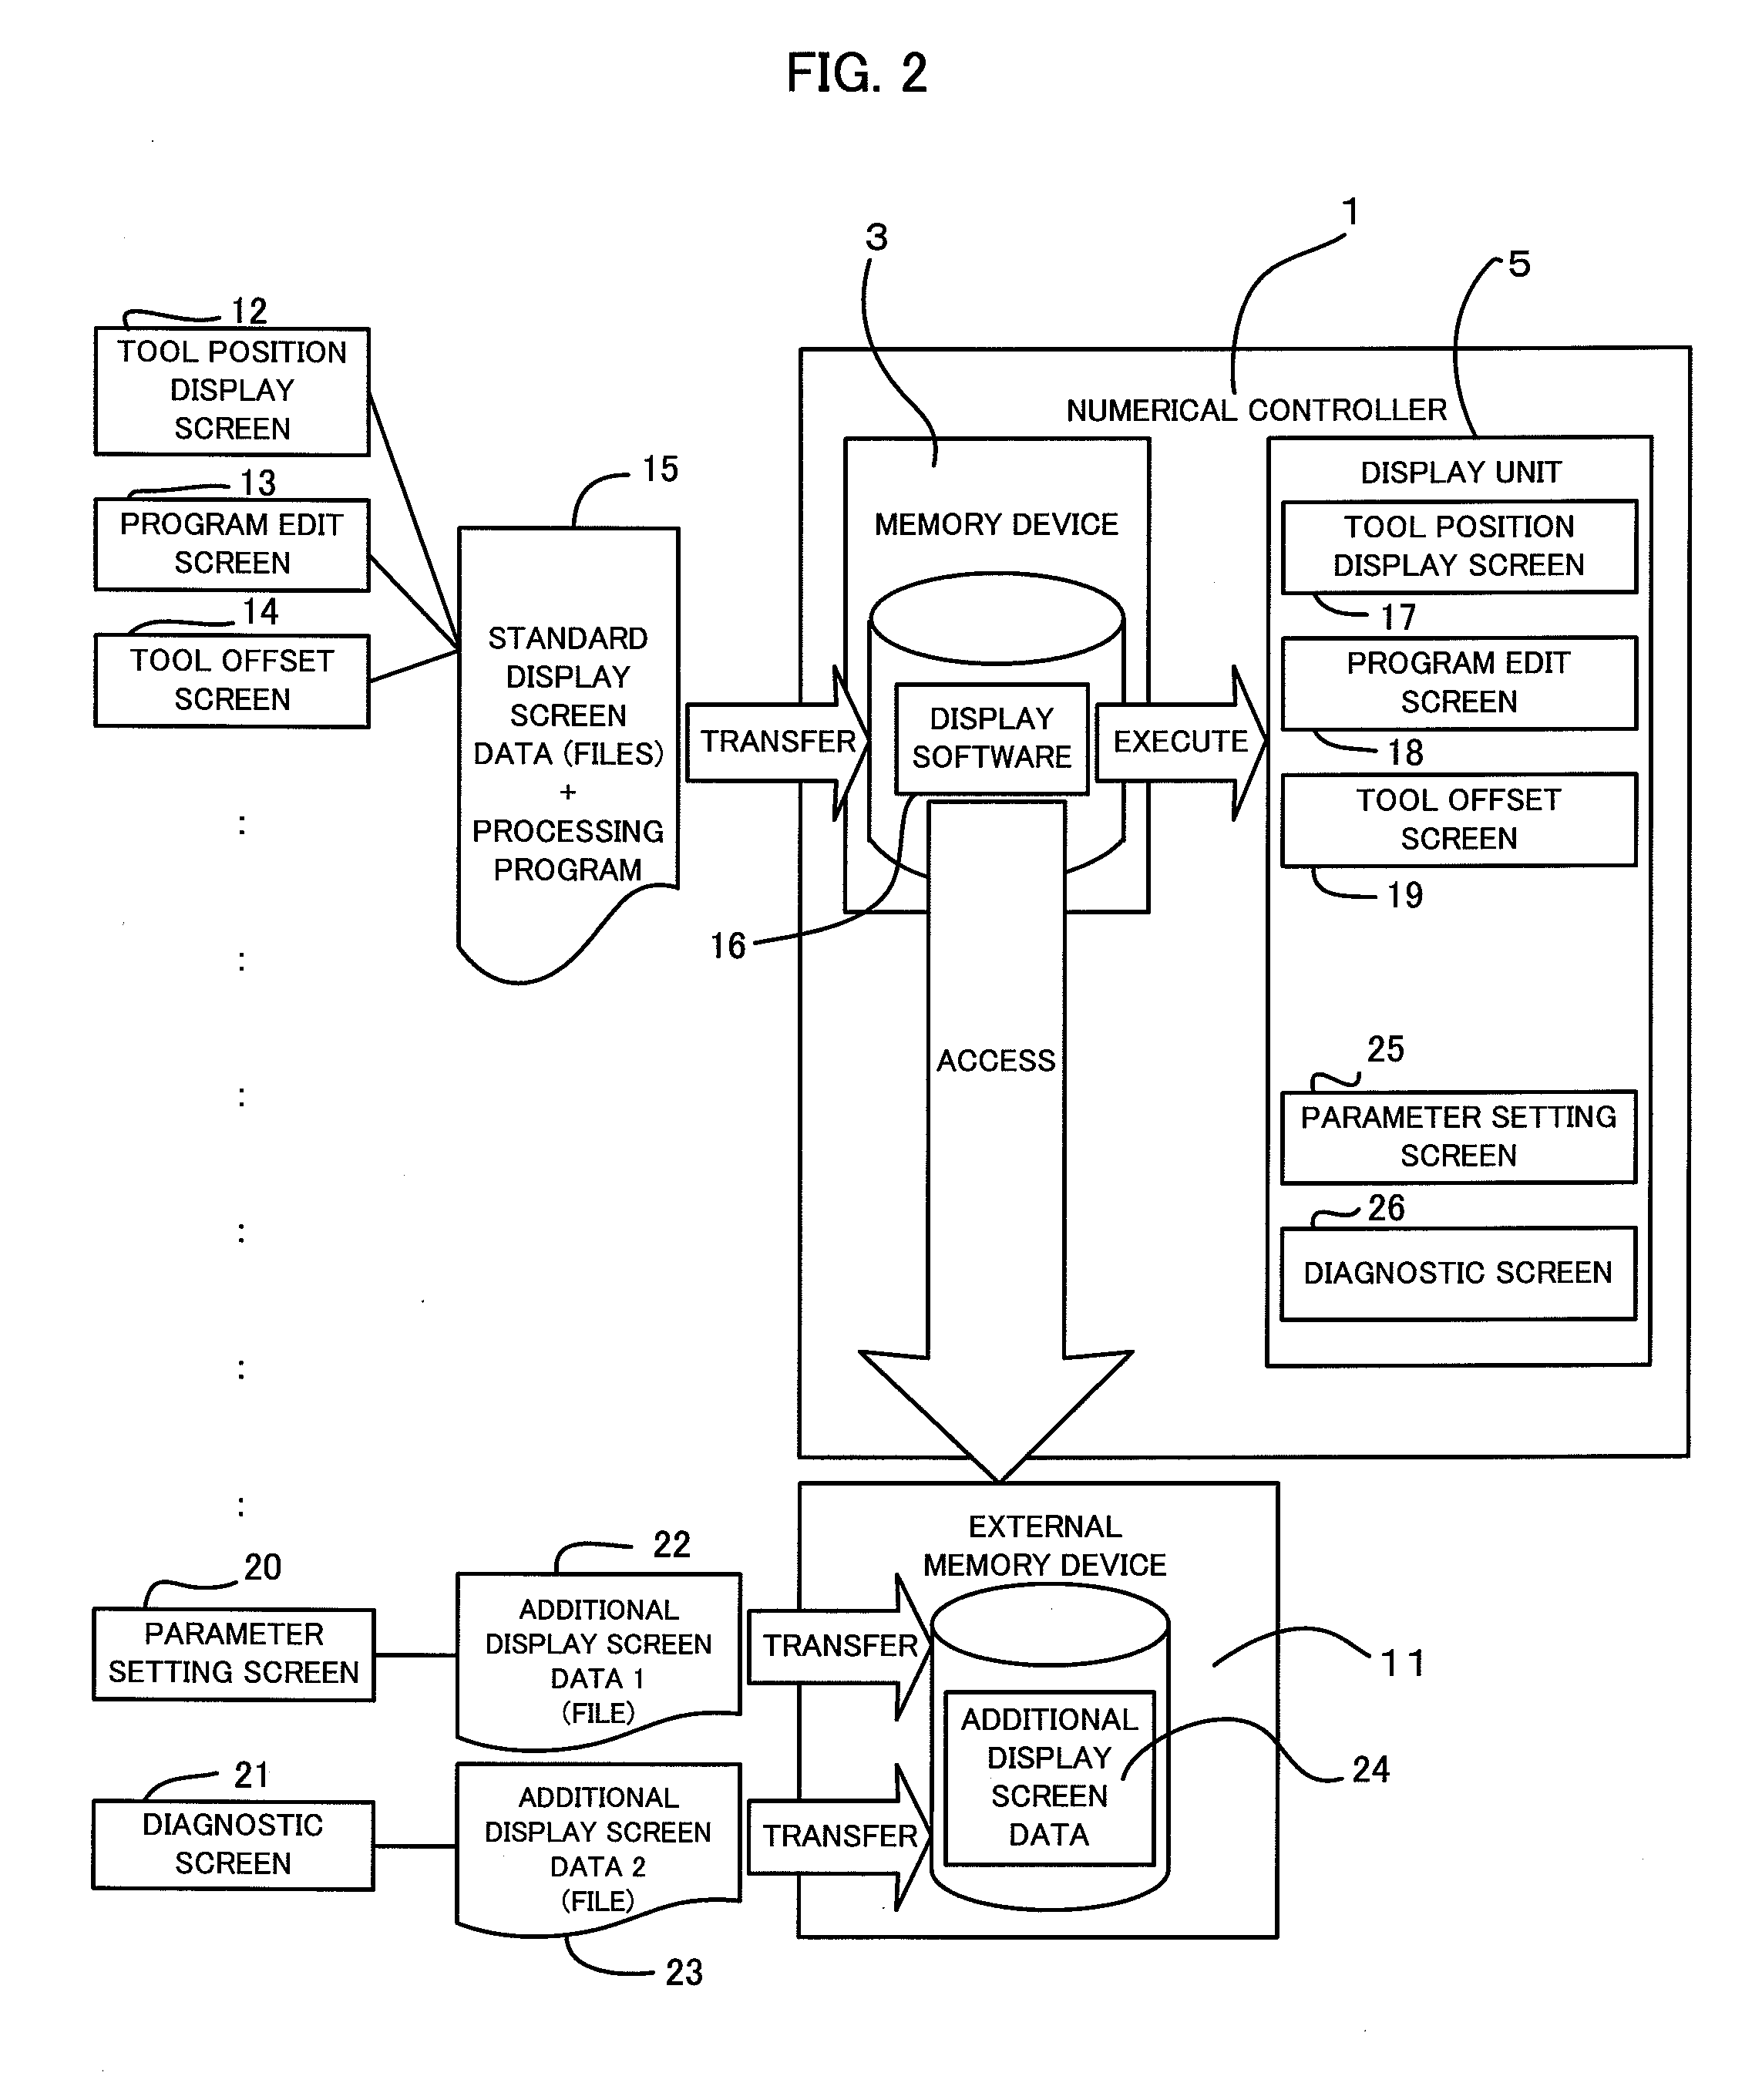 Numerical controller with function to add display screens